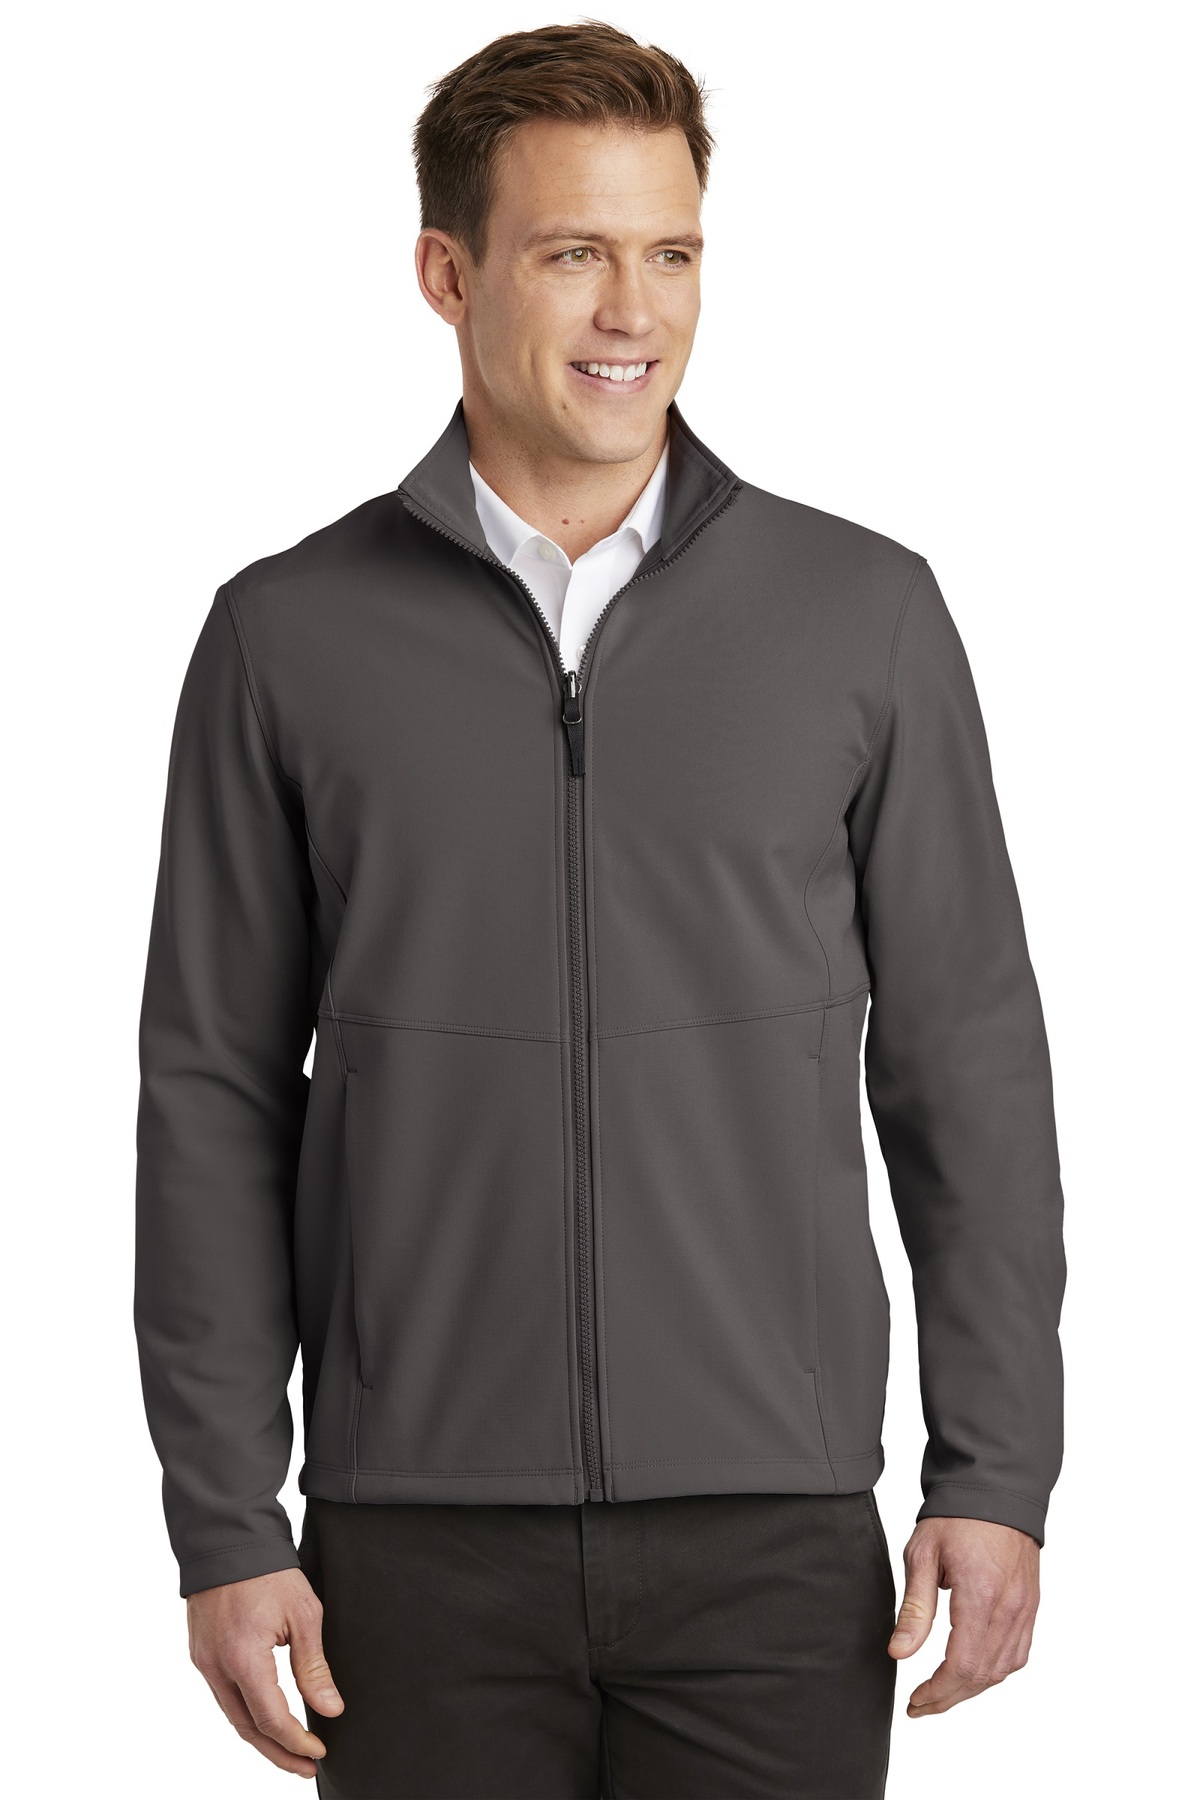 Port Authority Embroidered Men's Collective Soft Shell Jacket - Queensboro